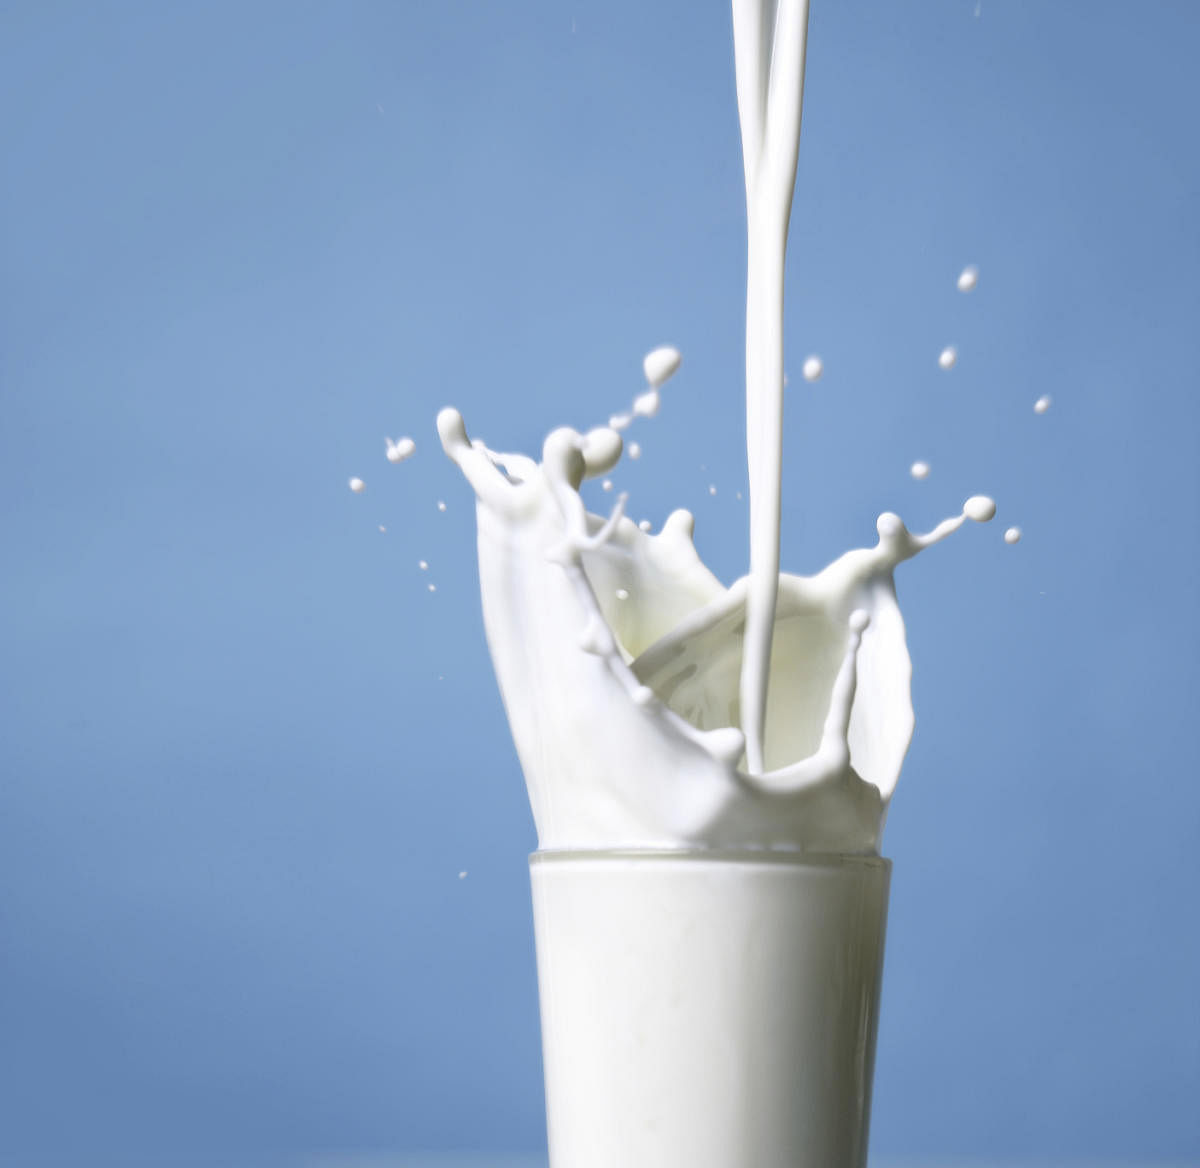 Milk is a common consumption item, its price increase impacts on general price level or inflation, ruling at 7.35% in Dec 2019. (File Image)